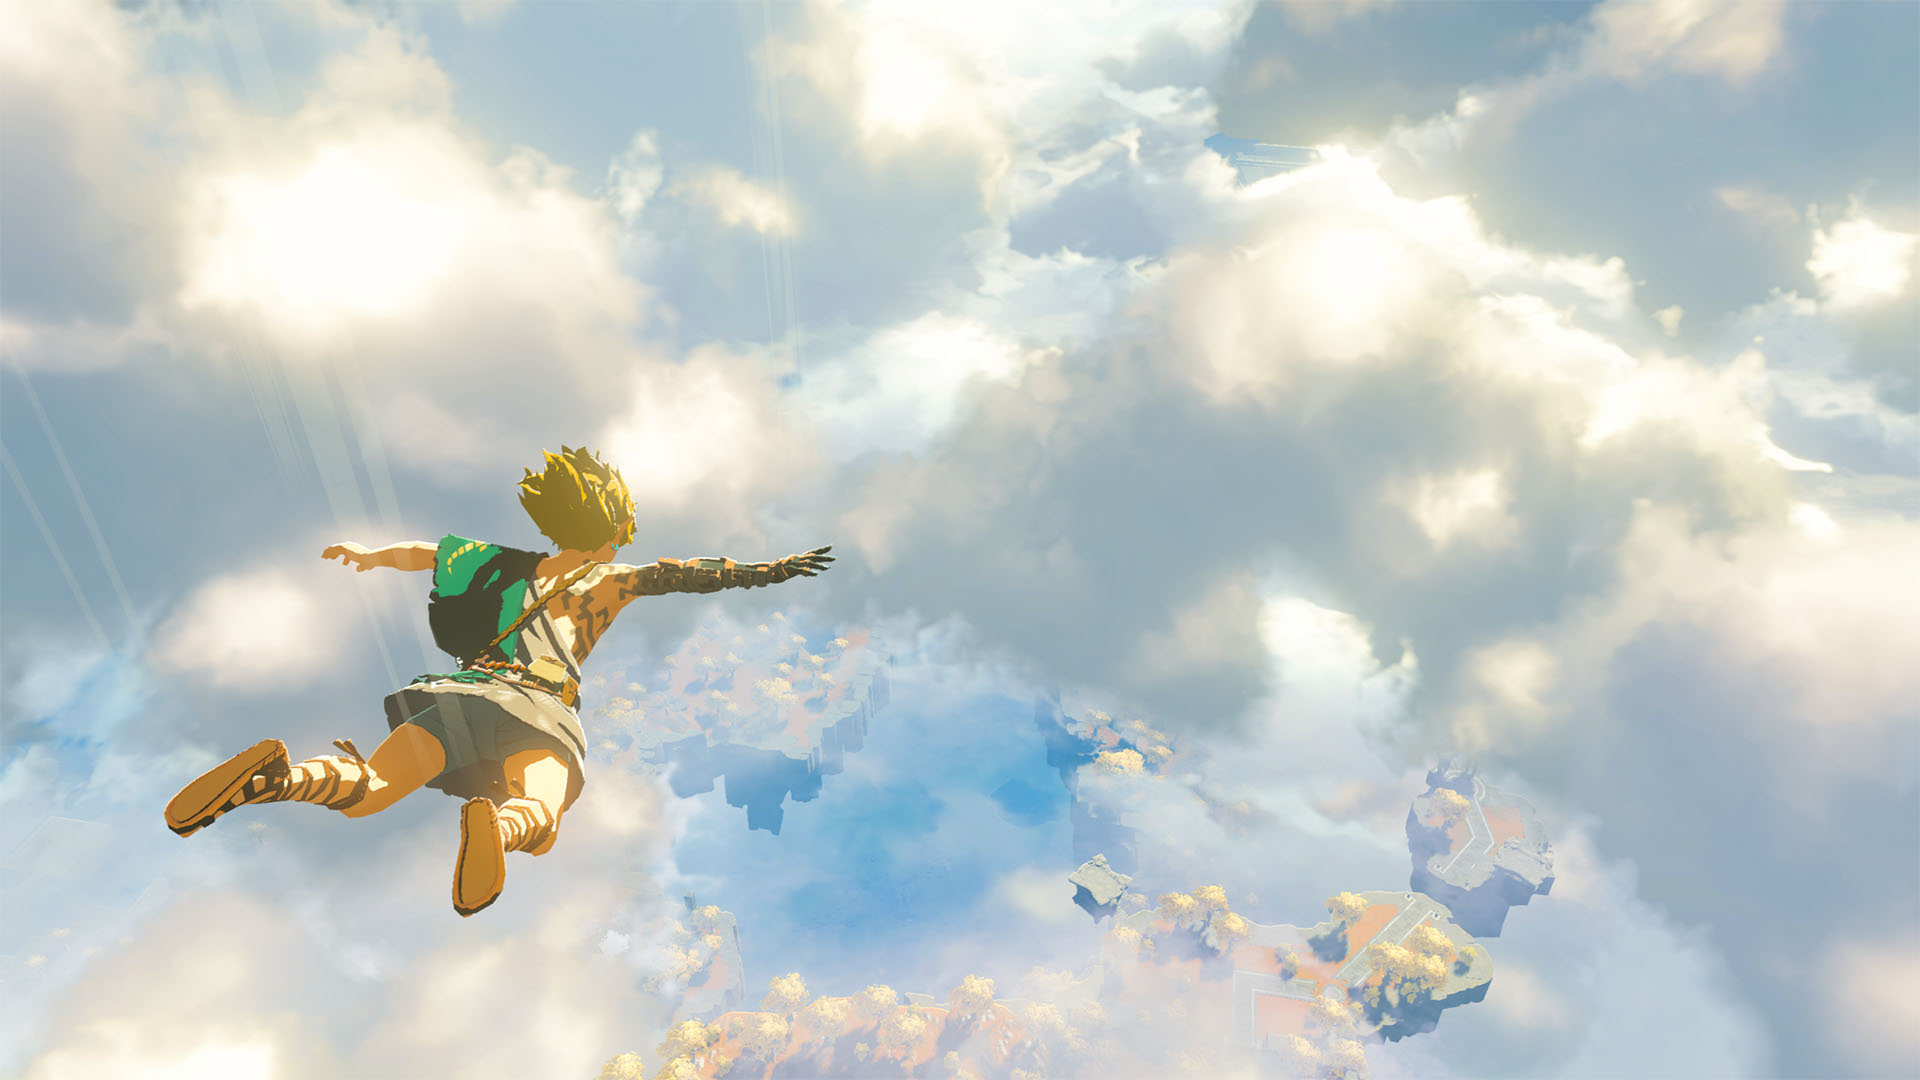 Link from the Legend of Zelda falls majestically from far above the Kingdom of Hyrule. His arms and legs are outstretched like a skydiver and his blond hair whips in the wind as he falls. Beneath him is a vast landscape partially obsuded by white clouds. The sky is also dotted with floating islands.